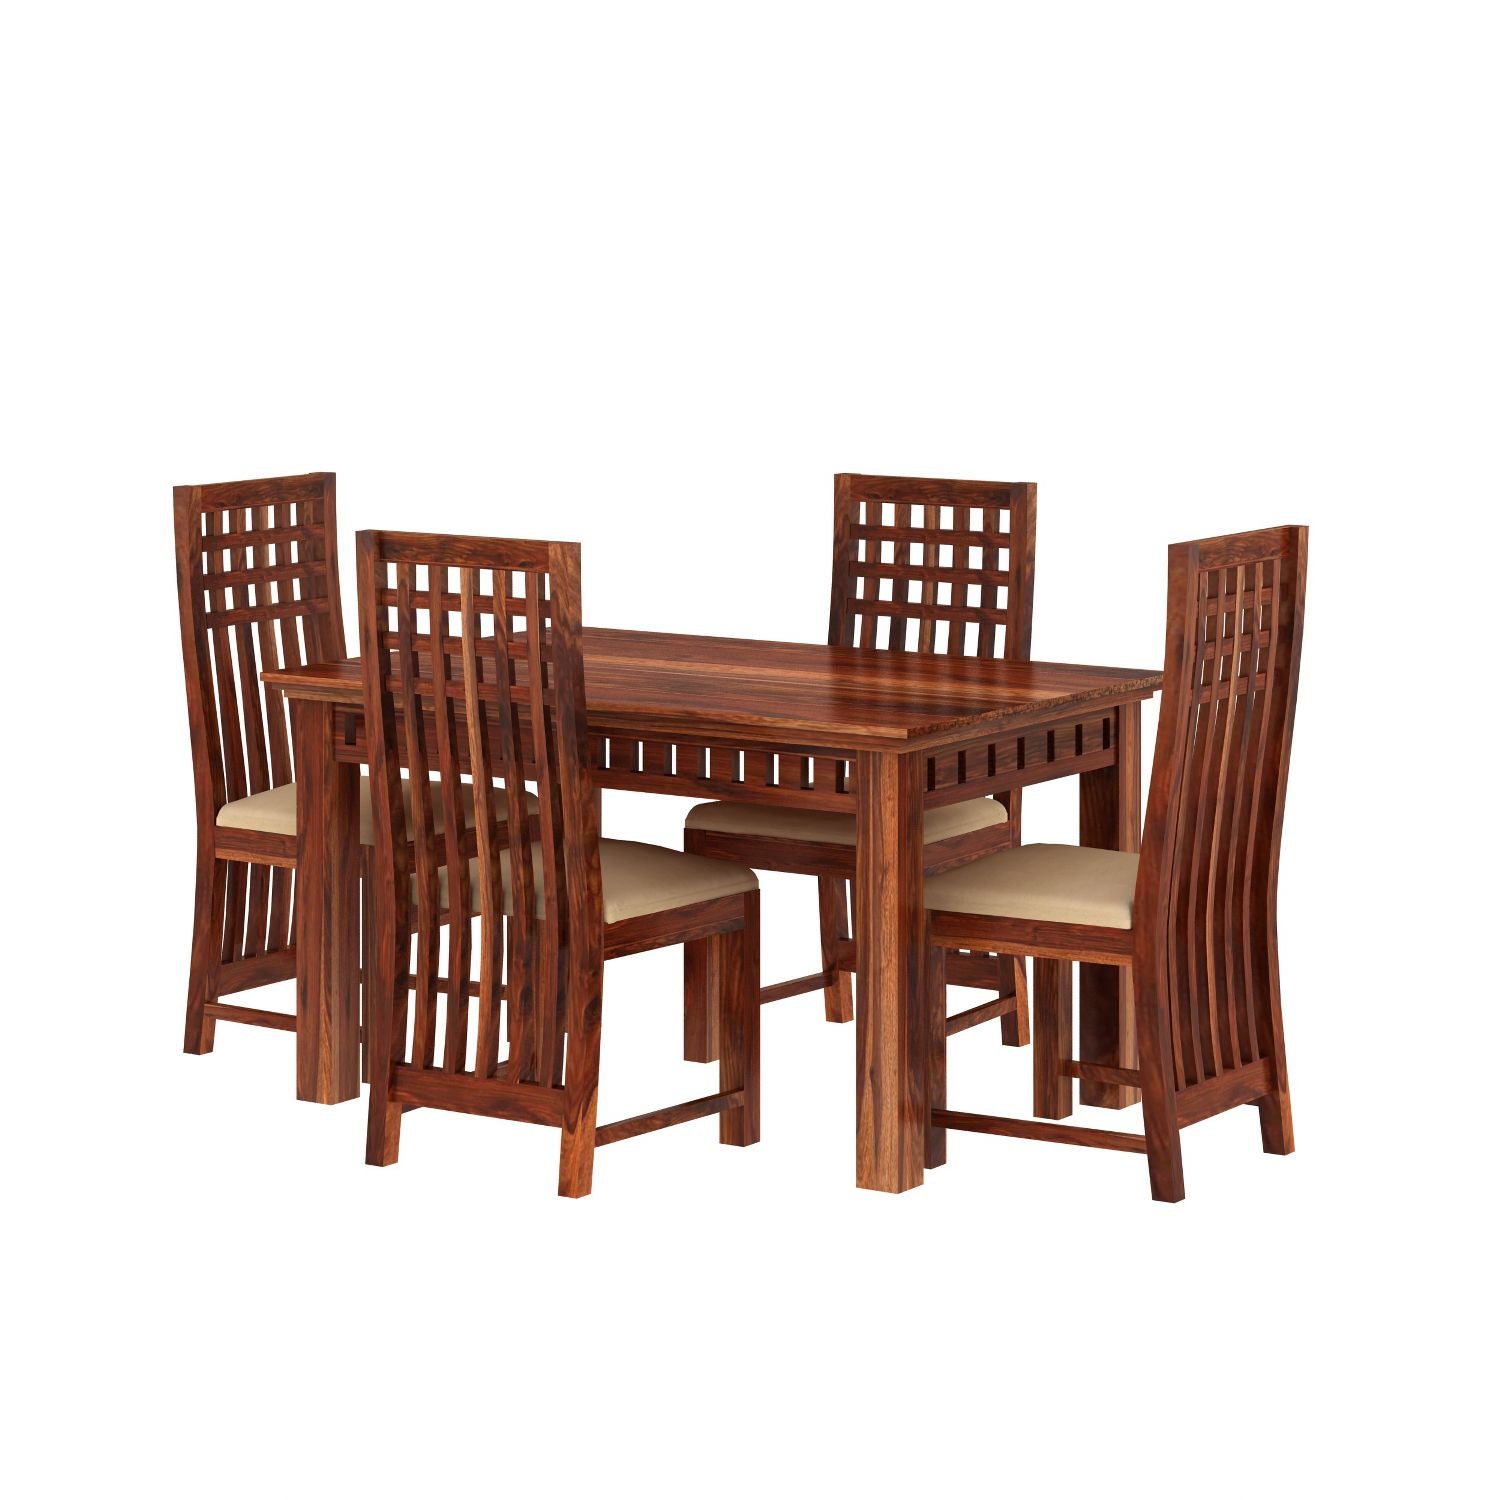 Amer Solid Sheesham Wood 4 Seater Dining Set (With Cushion, Natural Finish)